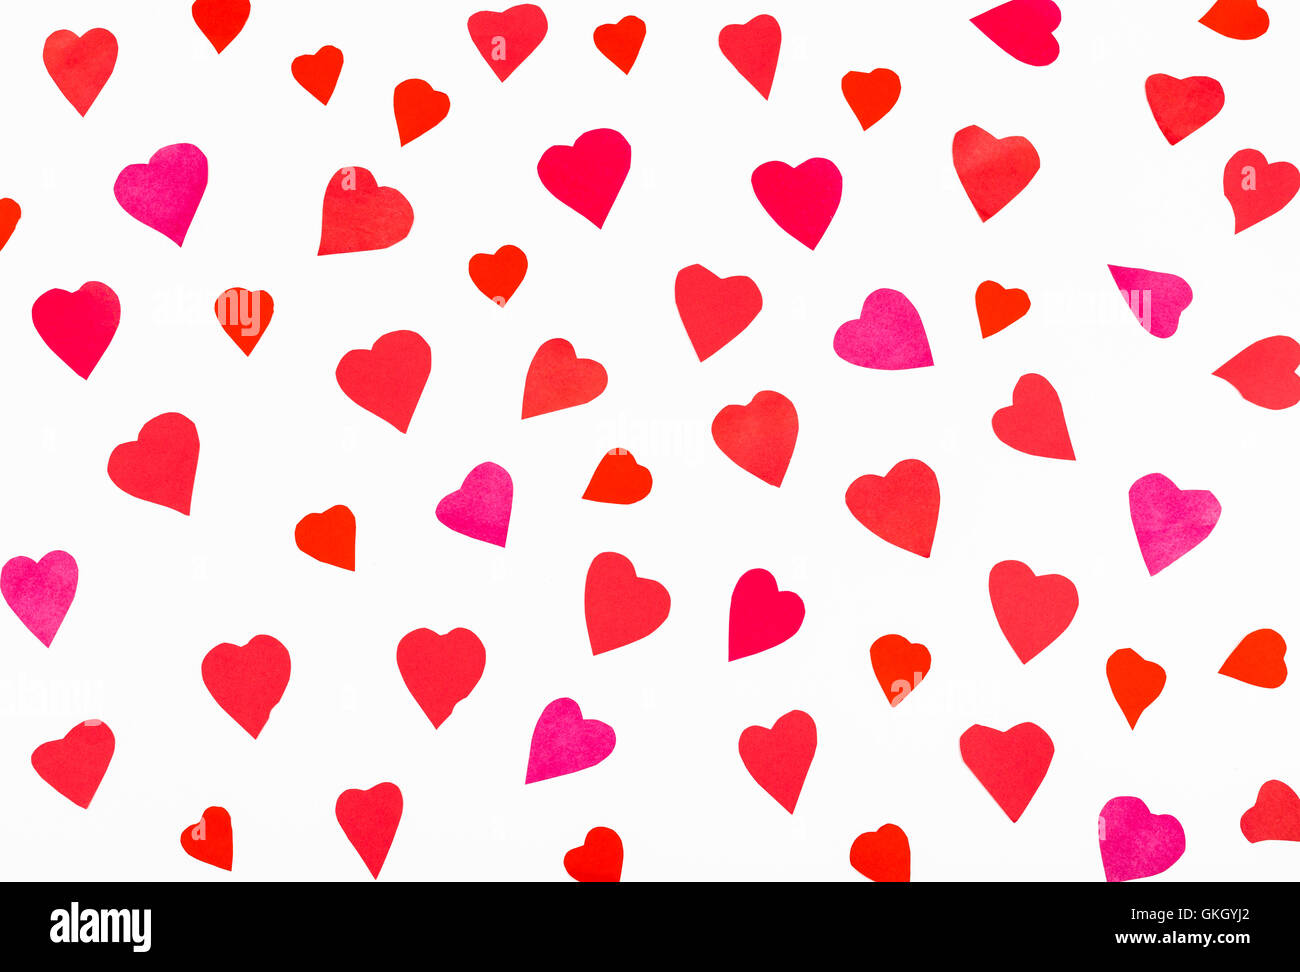 many pink and red hearts carved from paper on white background Stock Photo